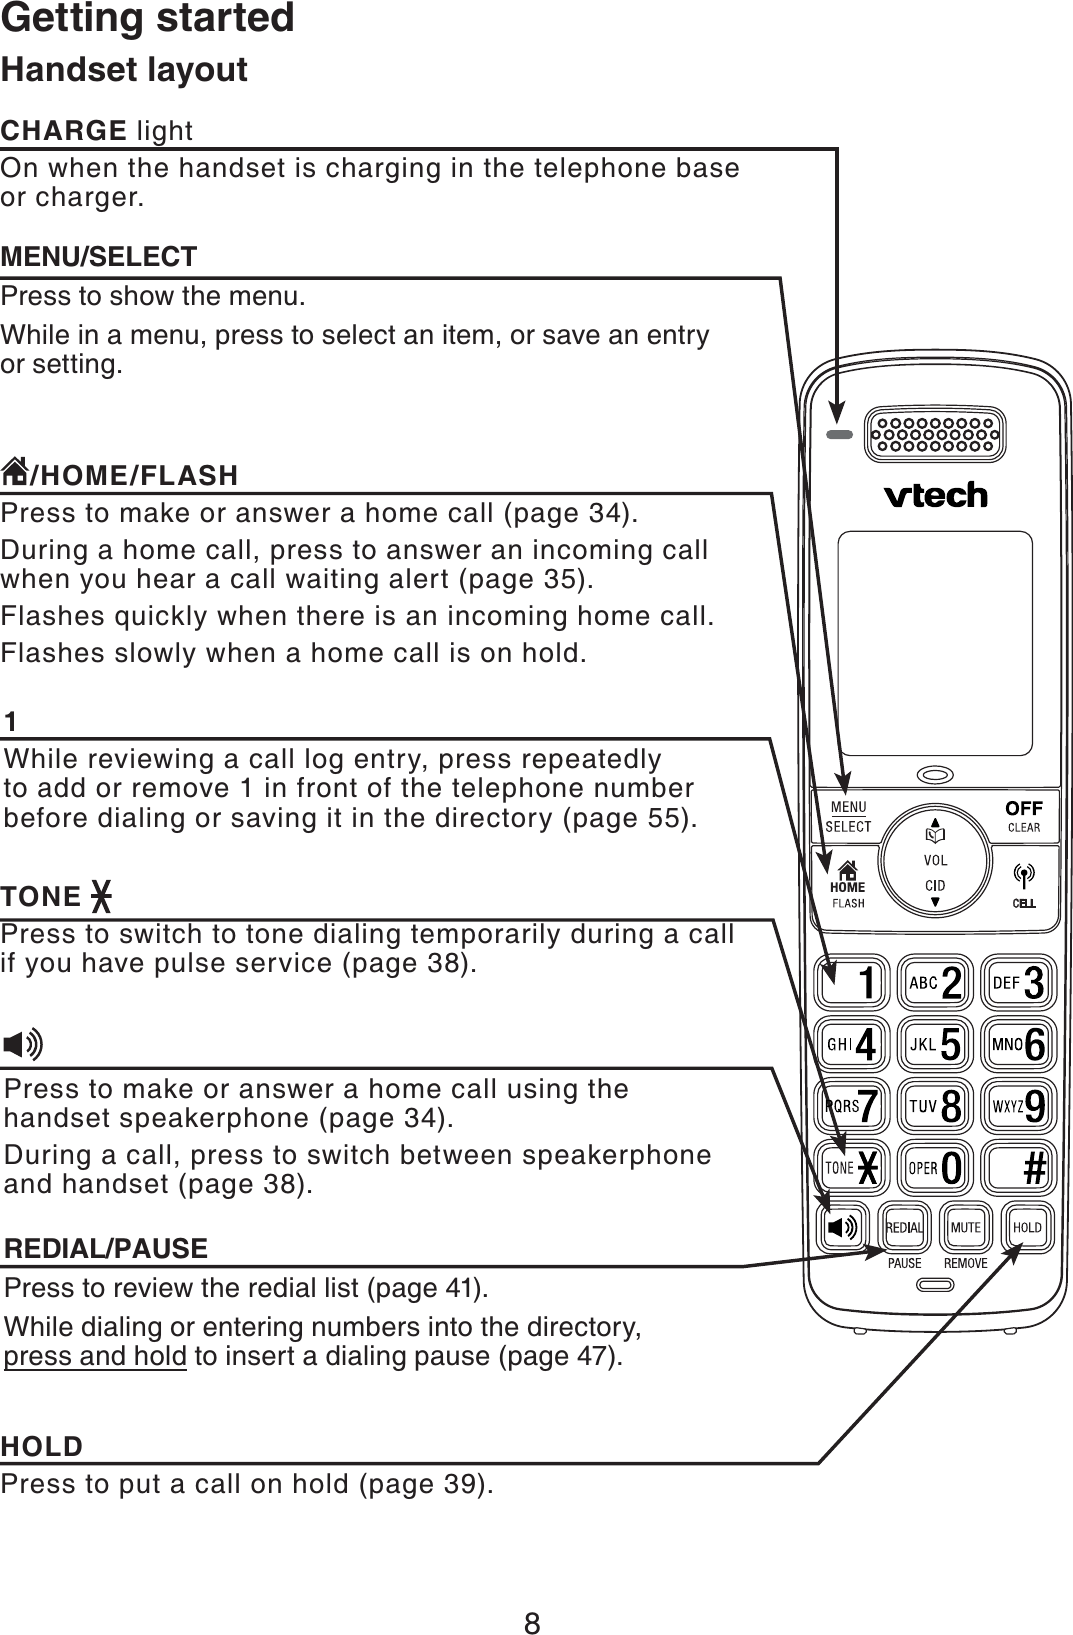 8Getting startedHandset layout1While reviewing a call log entry, press repeatedly to add or remove 1 in front of the telephone number before dialing or saving it in the directory (page 55)./HOME/FLASHPress to make or answer a home call (page 34).During a home call, press to answer an incoming call when you hear a call waiting alert (page 35).Flashes quickly when there is an incoming home call.Flashes slowly when a home call is on hold.Press to make or answer a home call using the handset speakerphone (page 34).During a call, press to switch between speakerphone and handset (page 38).HOLDPress to put a call on hold (page 39).TONEPress to switch to tone dialing temporarily during a call if you have pulse service (page 38).CHARGE lightOn when the handset is charging in the telephone base or charger.MENU/SELECTPress to show the menu.While in a menu, press to select an item, or save an entry or setting.REDIAL/PAUSEPress to review the redial list (page 41). While dialing or entering numbers into the directory, press and hold to insert a dialing pause (page 47).